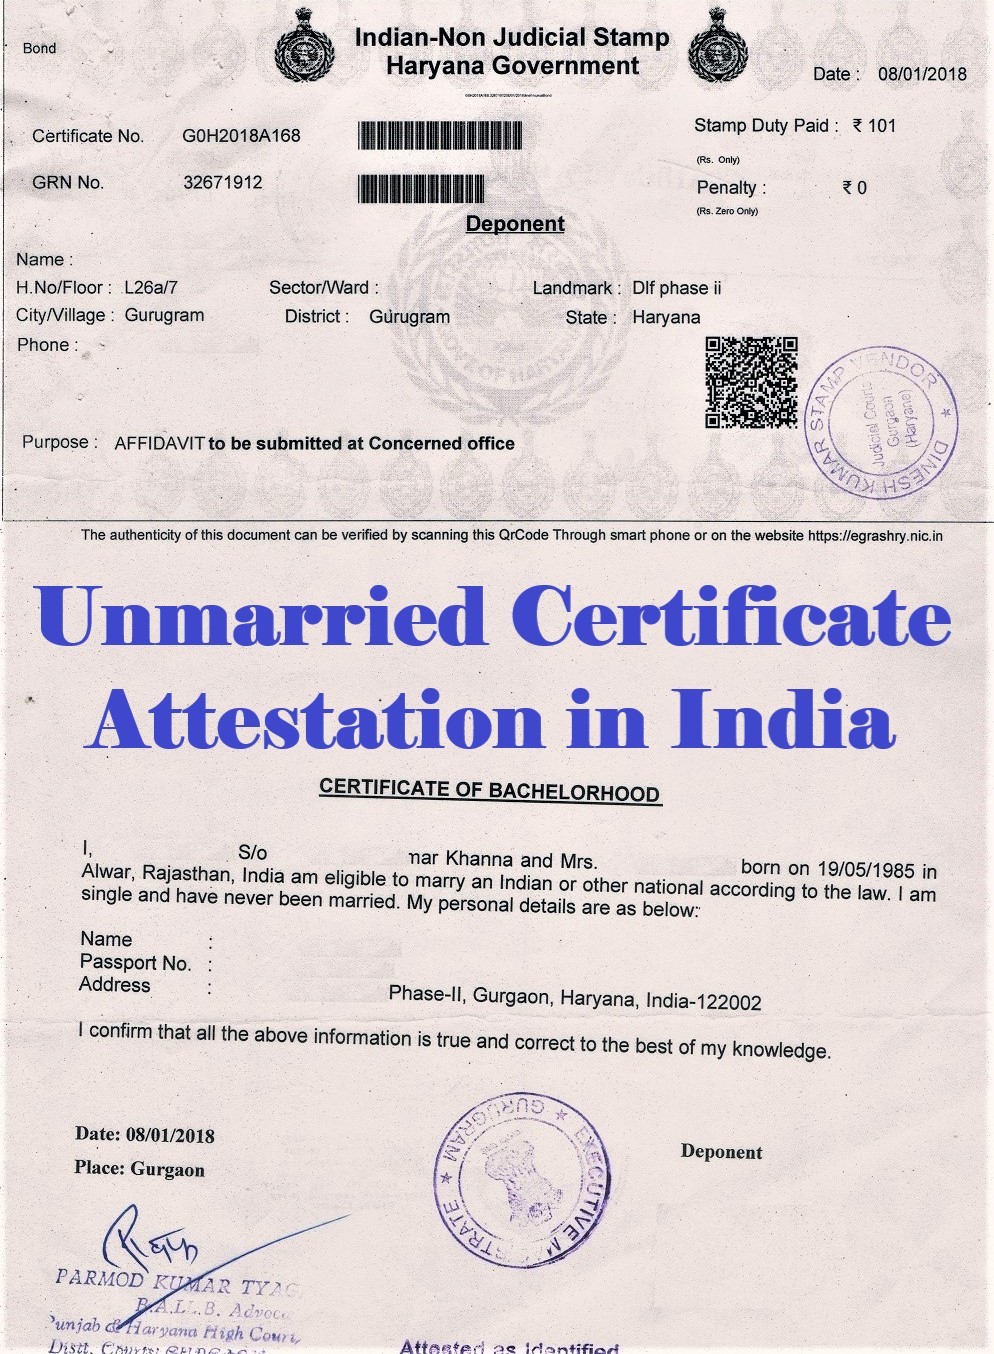 Unmarried Certificate Attestation from Haiti Embassy